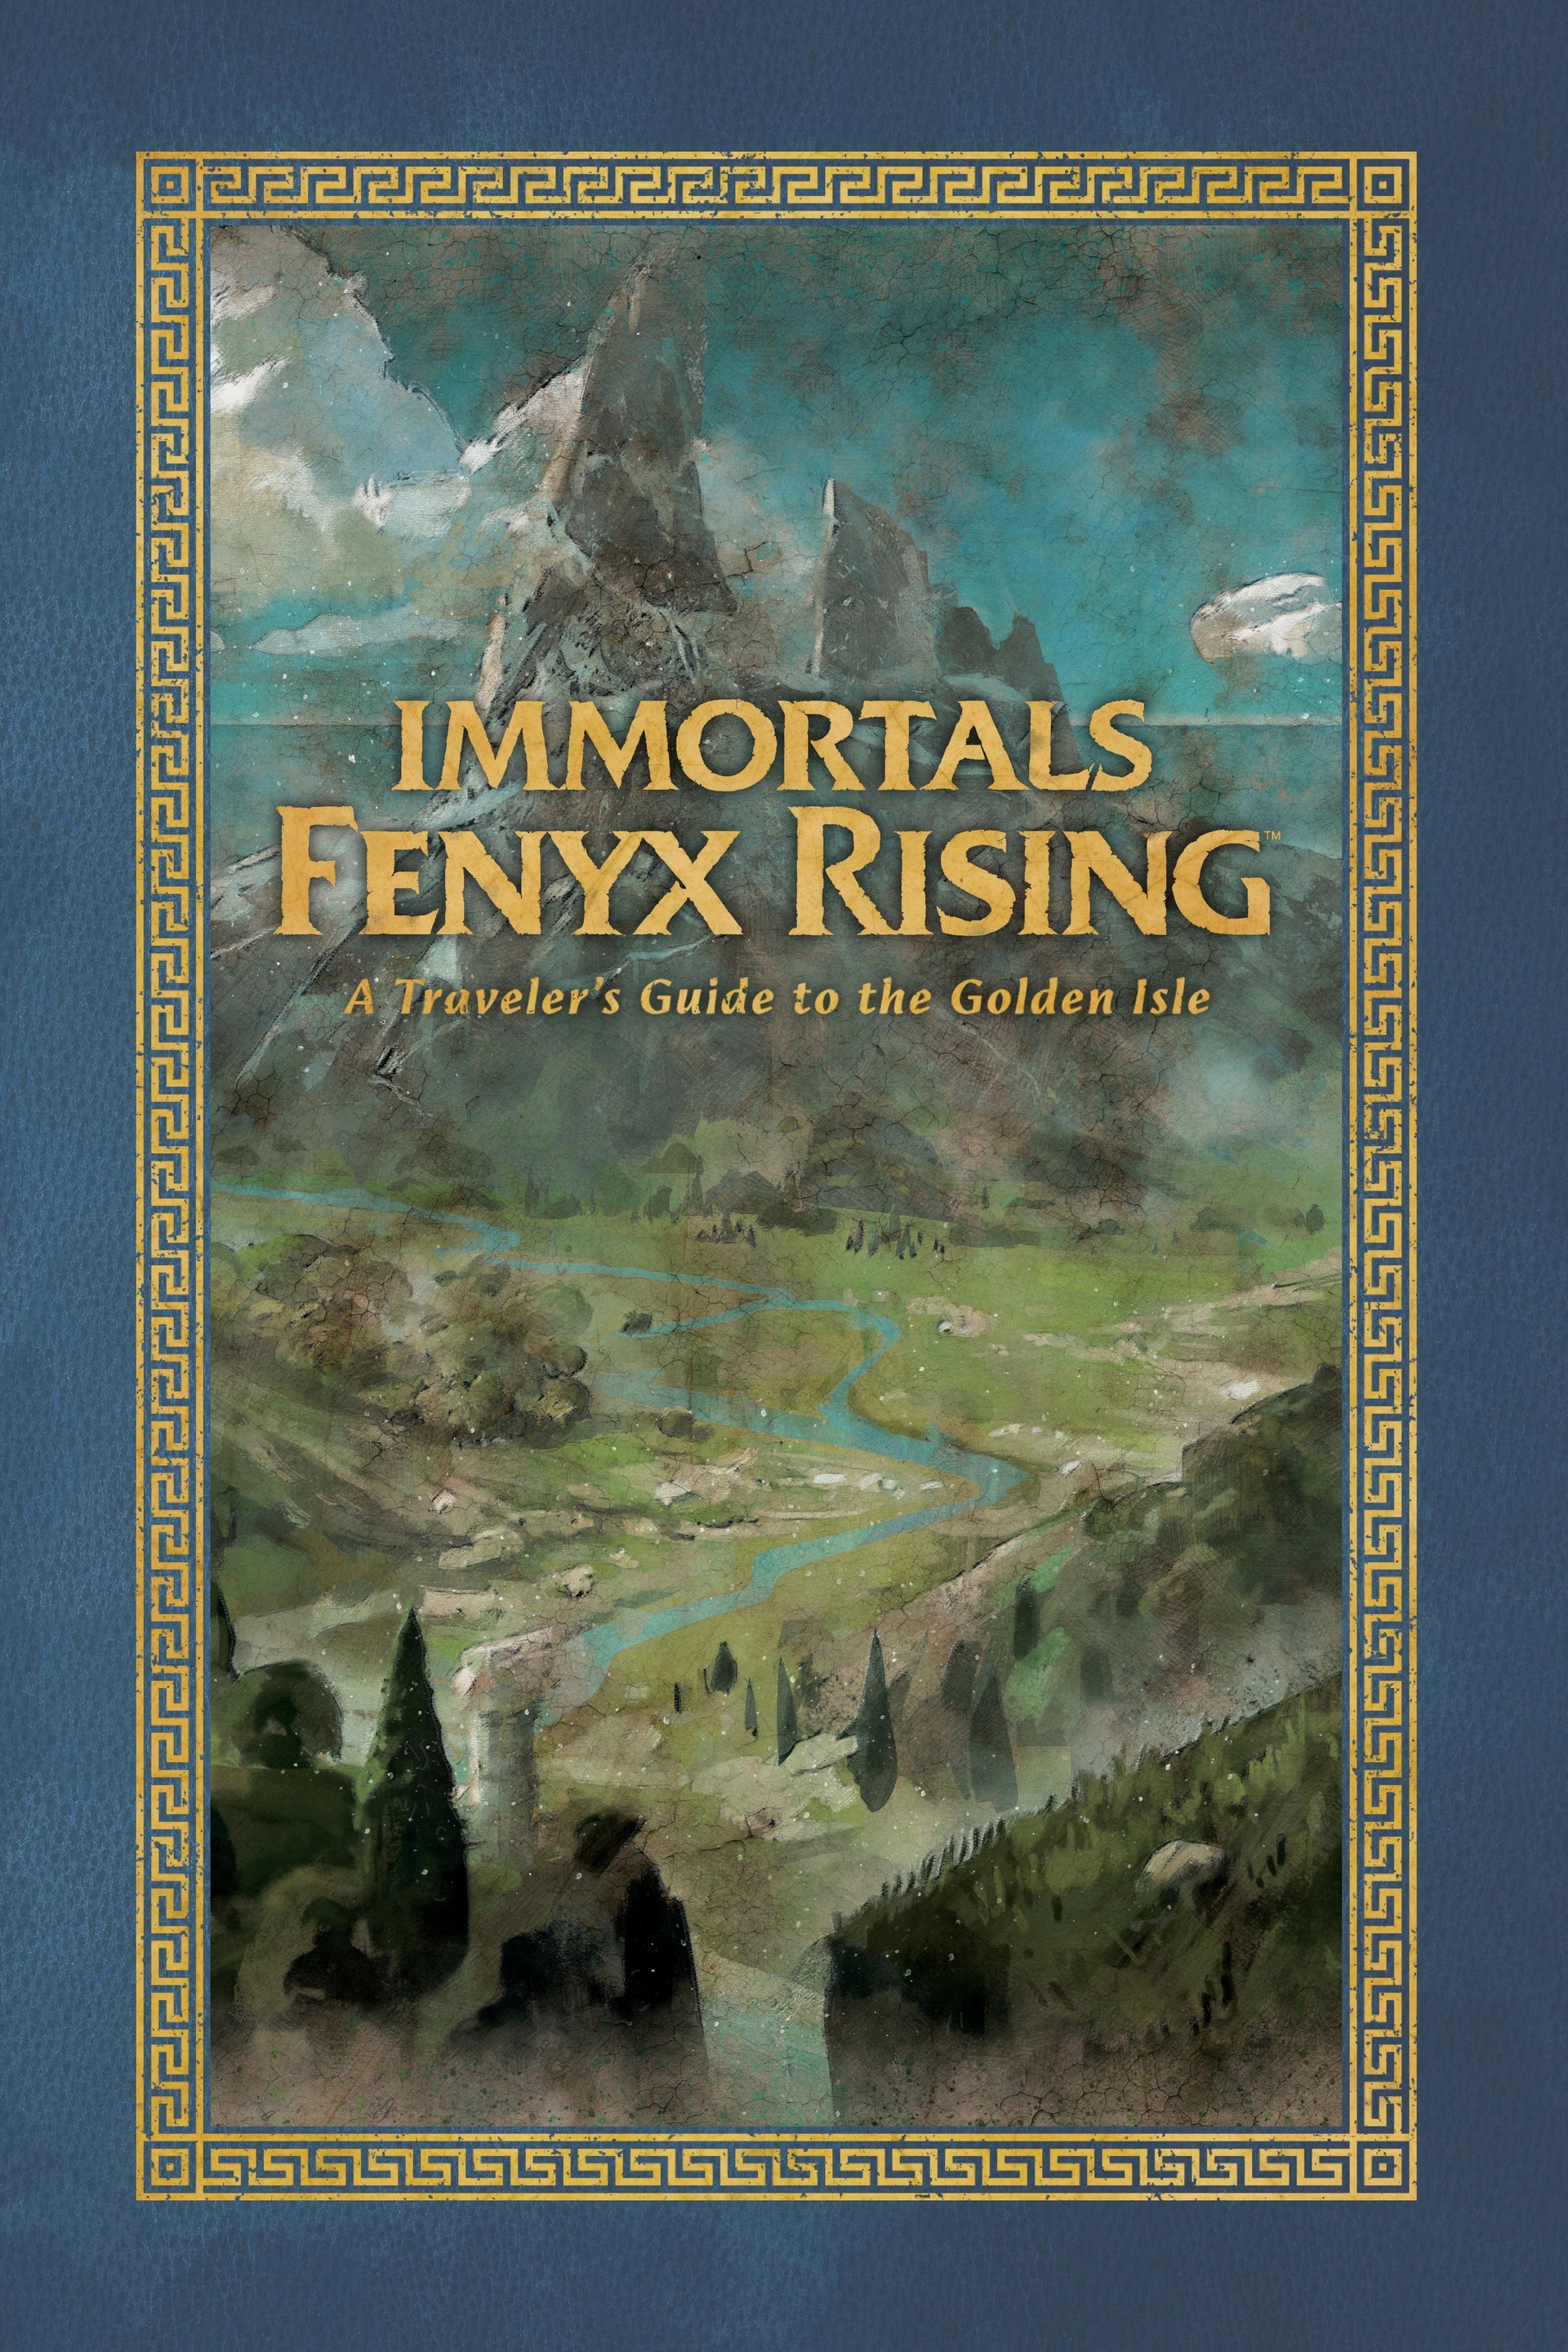 Read online Immortals Fenyx Rising: A Traveler's Guide to the Golden Isle comic -  Issue # TPB - 1